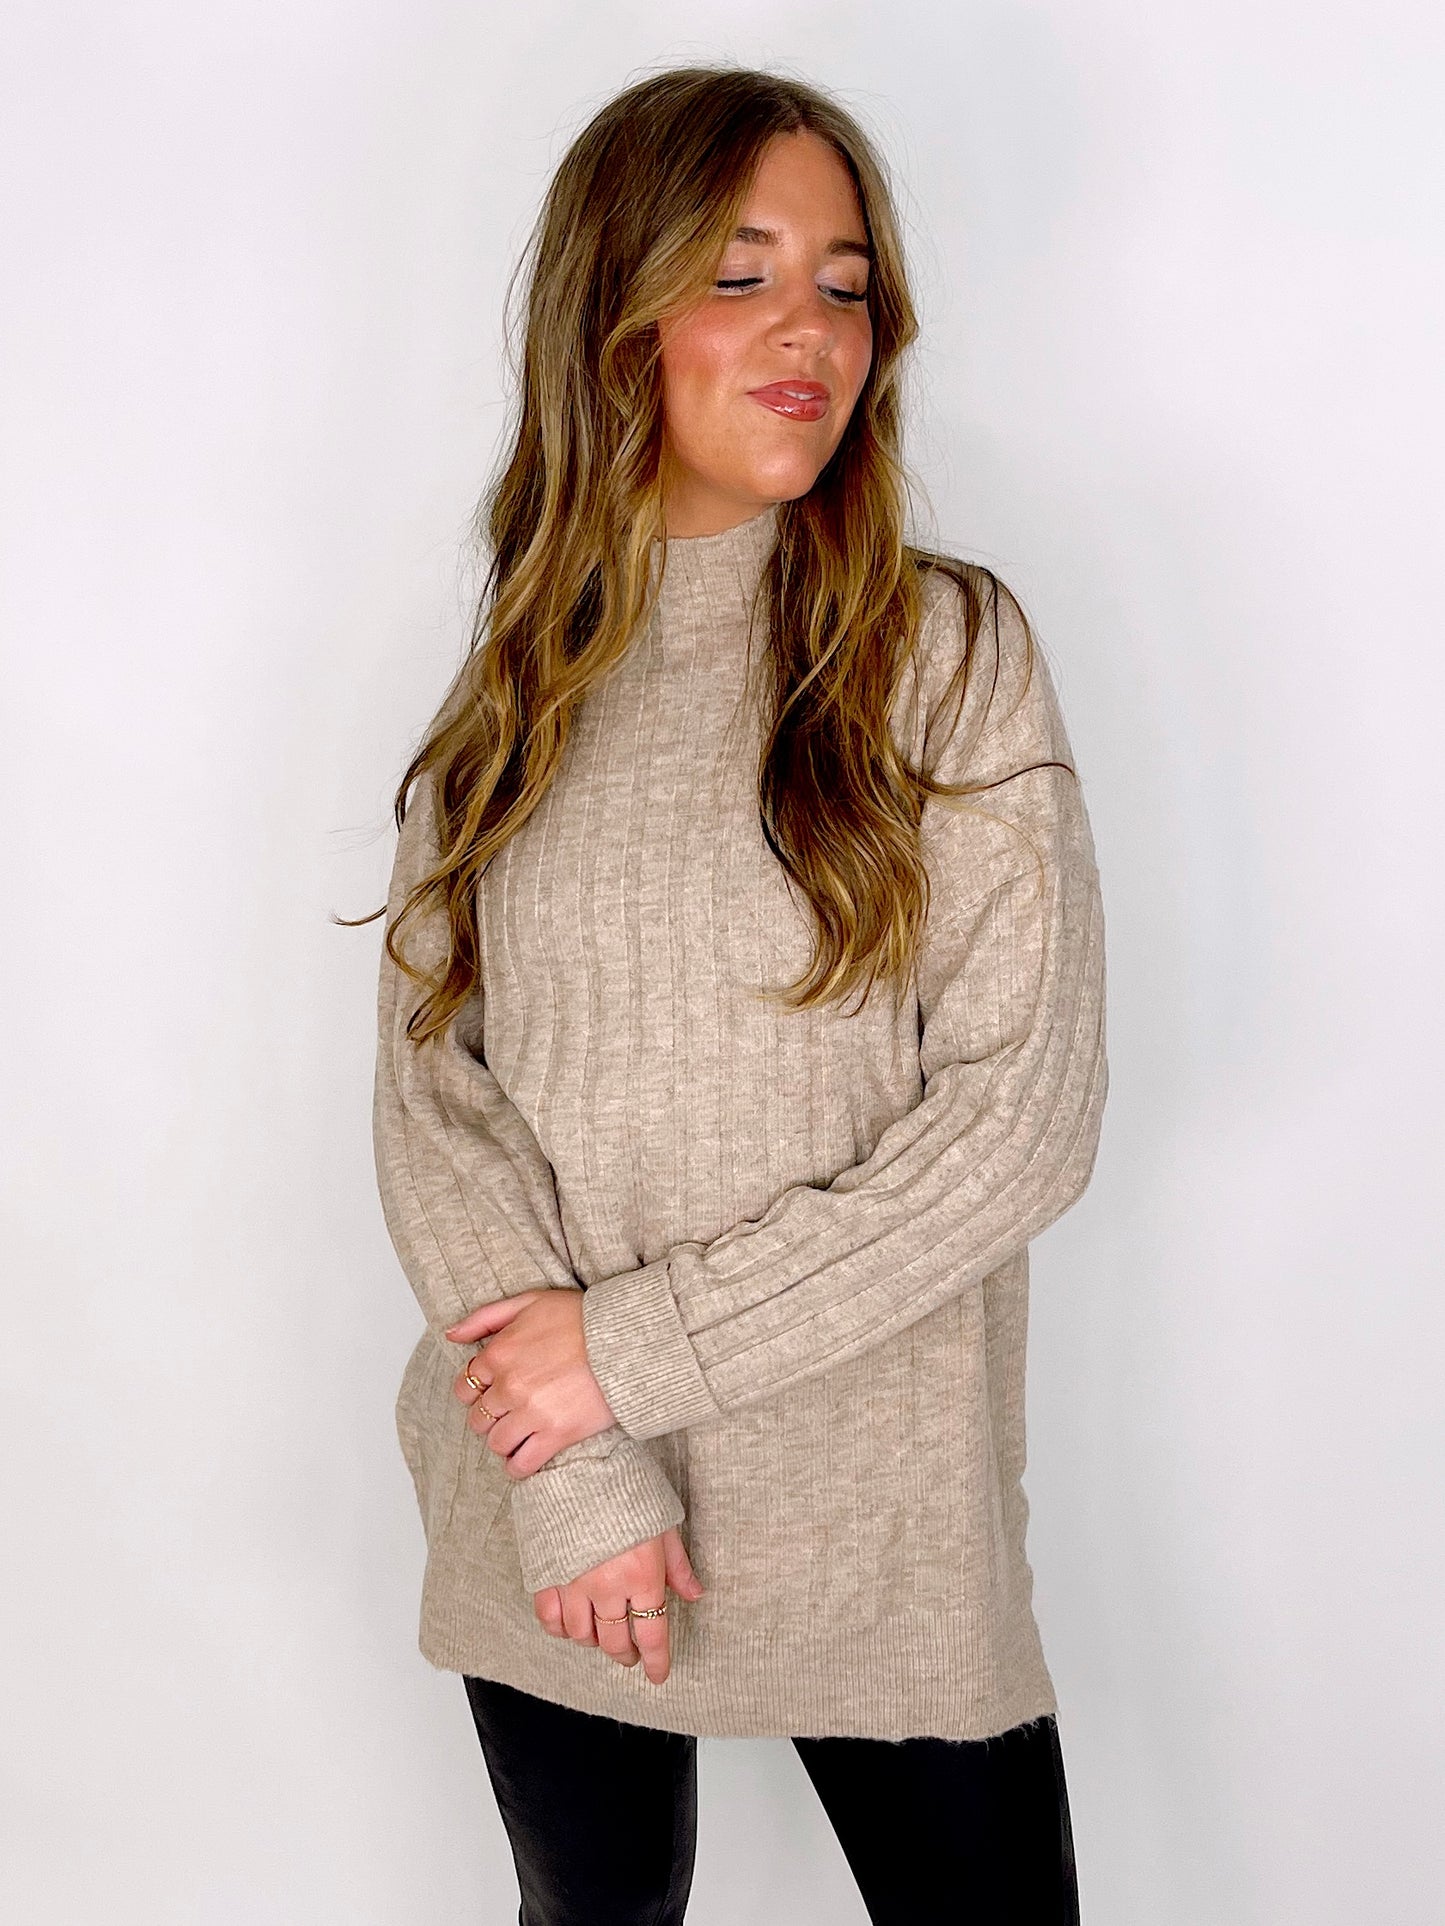 The Cara Sweater-Sweaters-THML-The Village Shoppe, Women’s Fashion Boutique, Shop Online and In Store - Located in Muscle Shoals, AL.